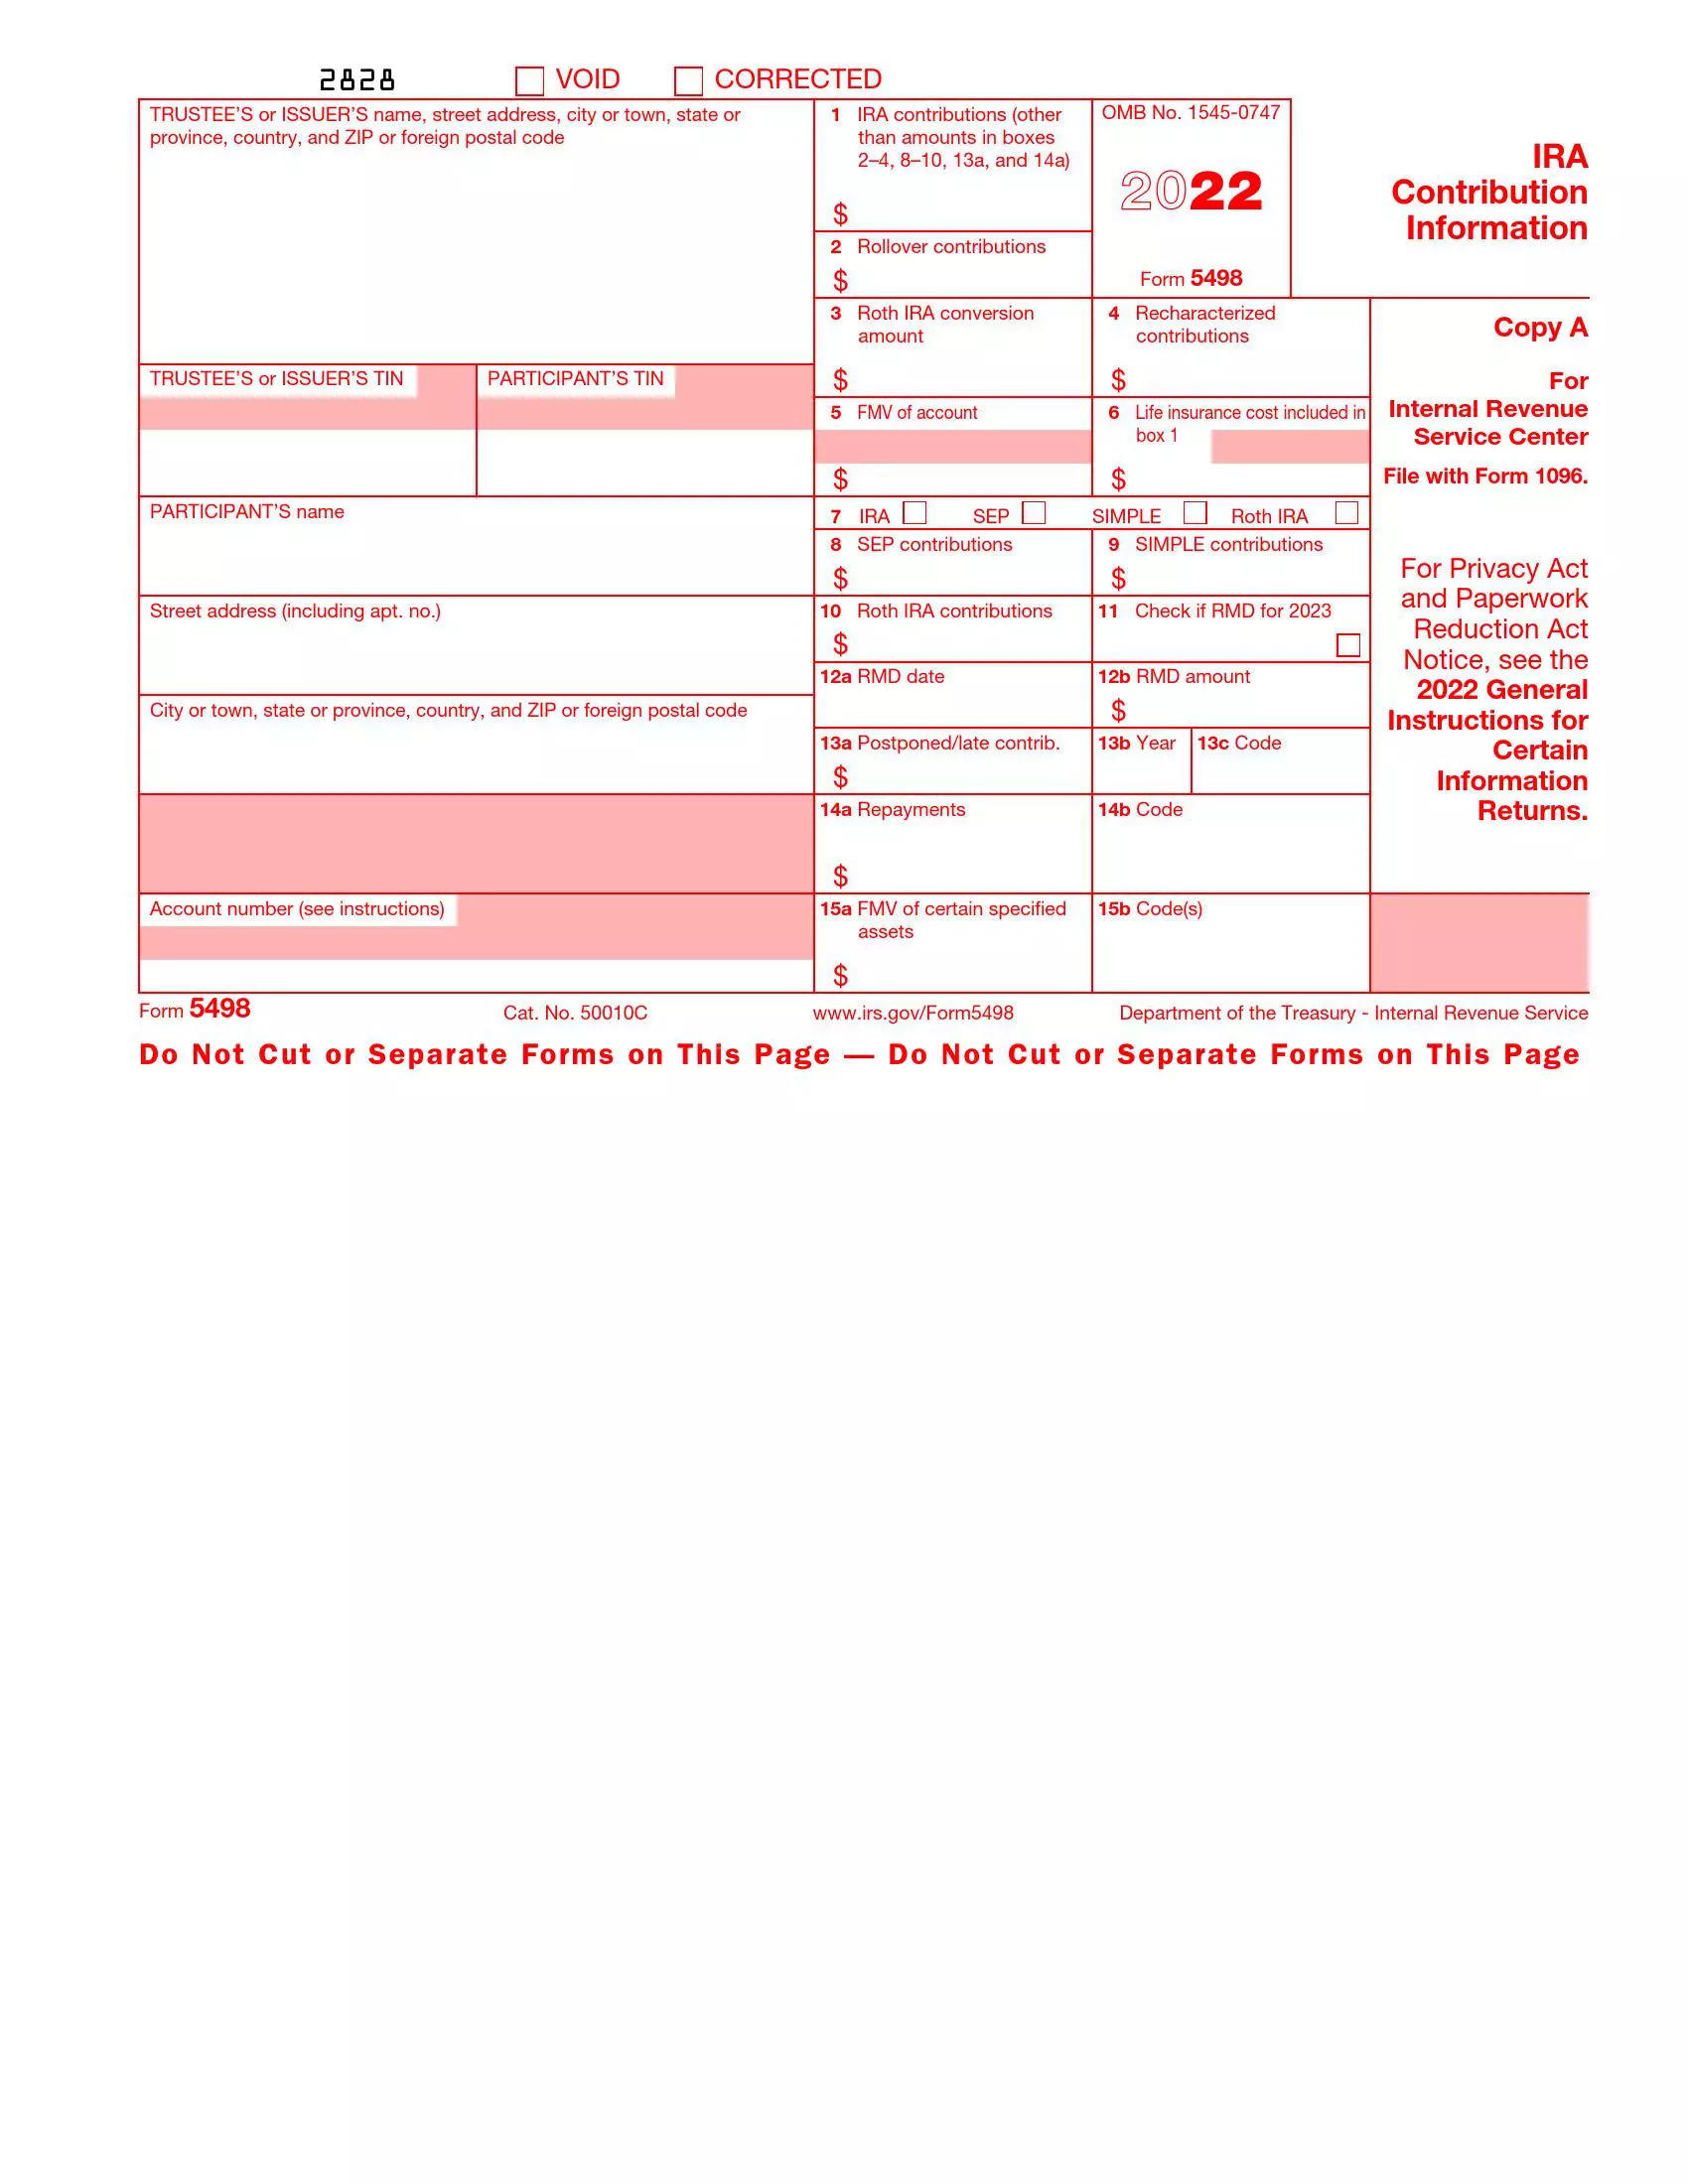 irs form 5498 2022 preview